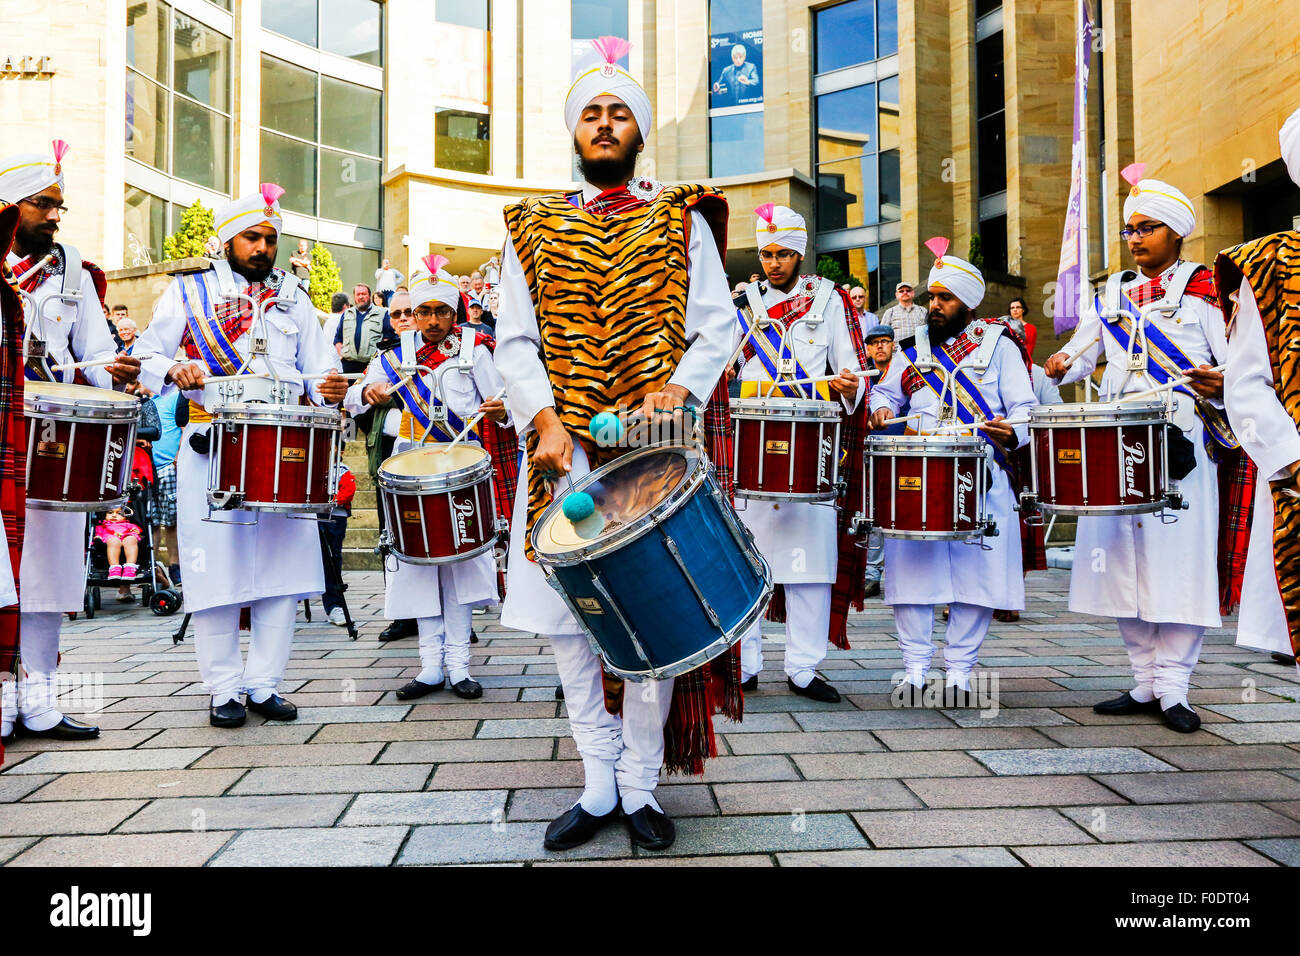 Glasgow, UK. 13th Aug, 2015. At Glasgow's annual Festival of Bagpipe music, 'Piping Live', which ends with the World Championship competition on Saturday 15the August, the National Pipe Band of Malaysia - 'The Sri Dasmesh Pipe Band' based in Kuala Lumpar, entertained the crowds in Buchanan Street and George Square, by playing a medley of Scottish bagpipe music, with beautiful sunshine as well. Credit:  Findlay/Alamy Live News Stock Photo